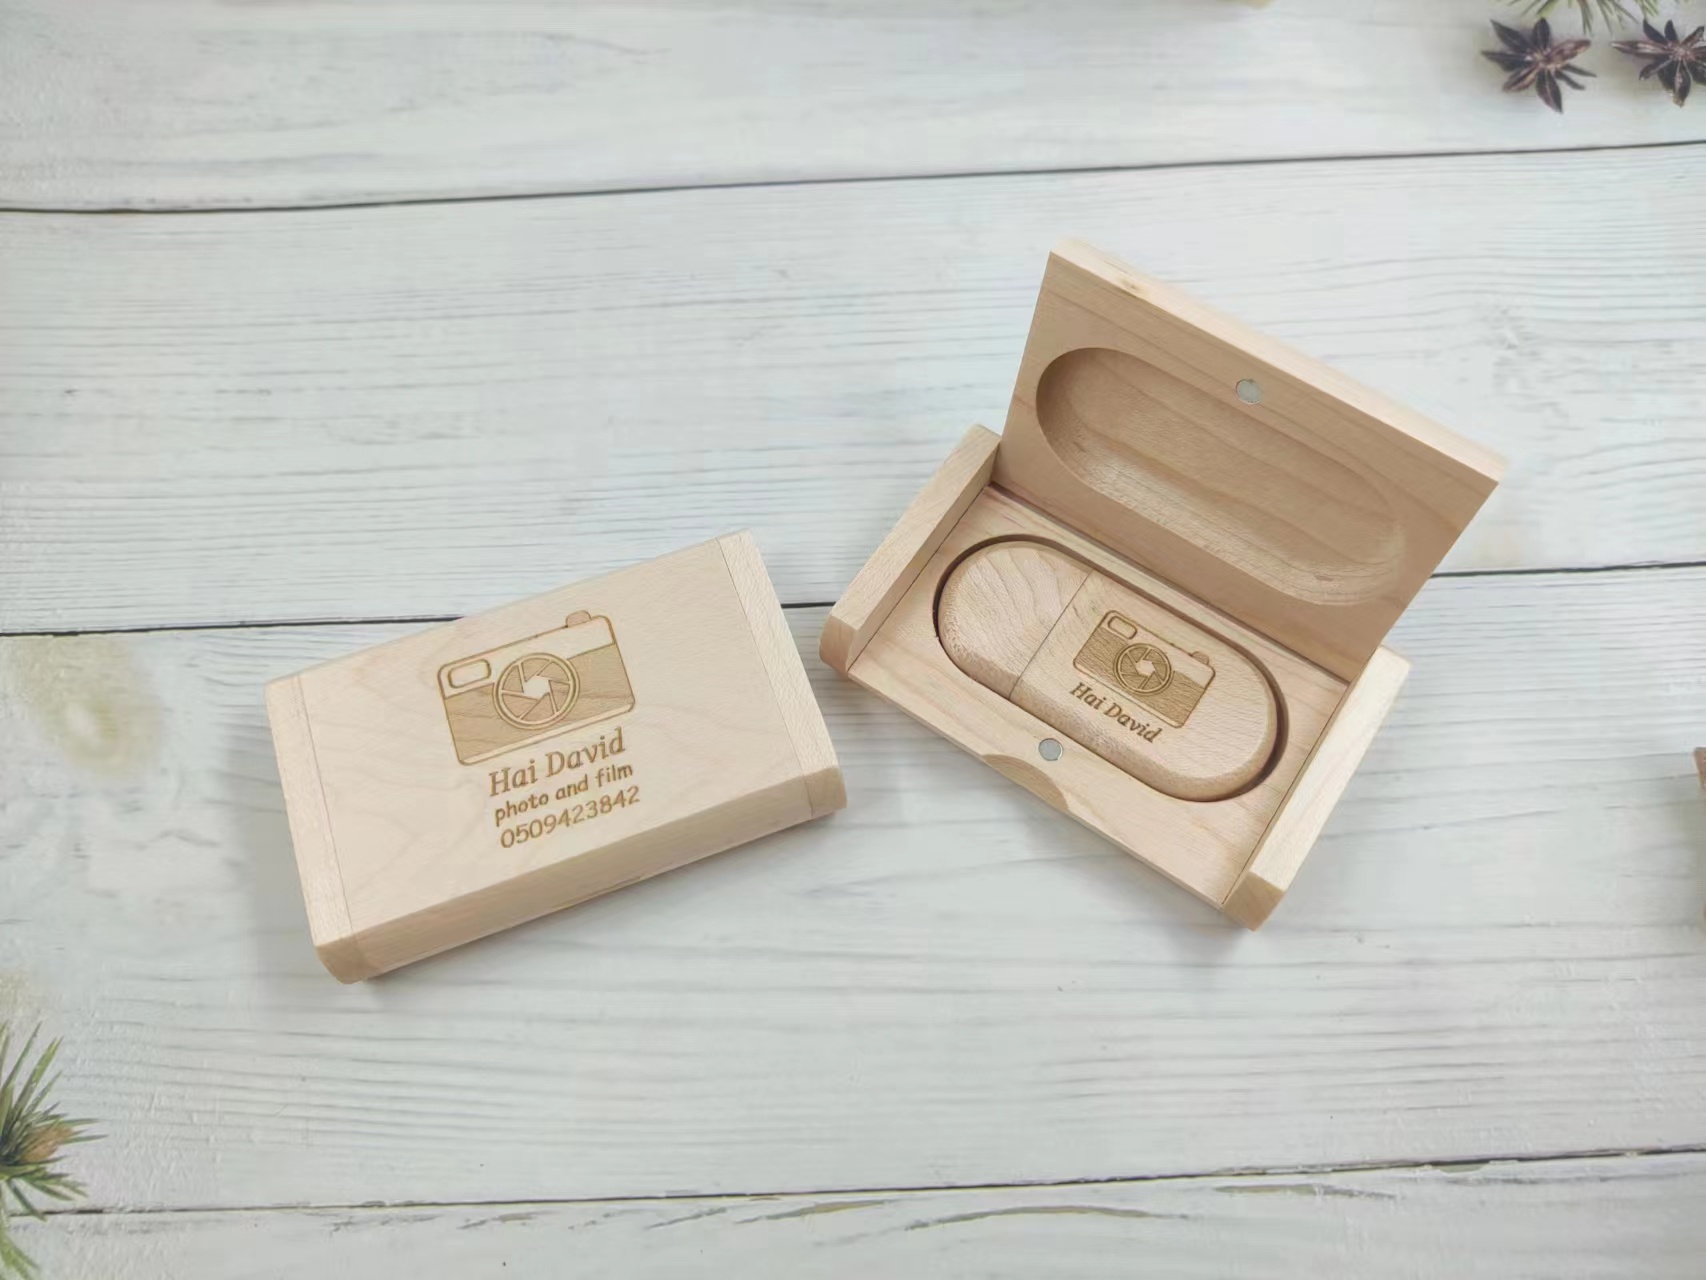 Oval wooden usb flash drive and clamshell wooden box order again USB3.0 64GB 100 pcs